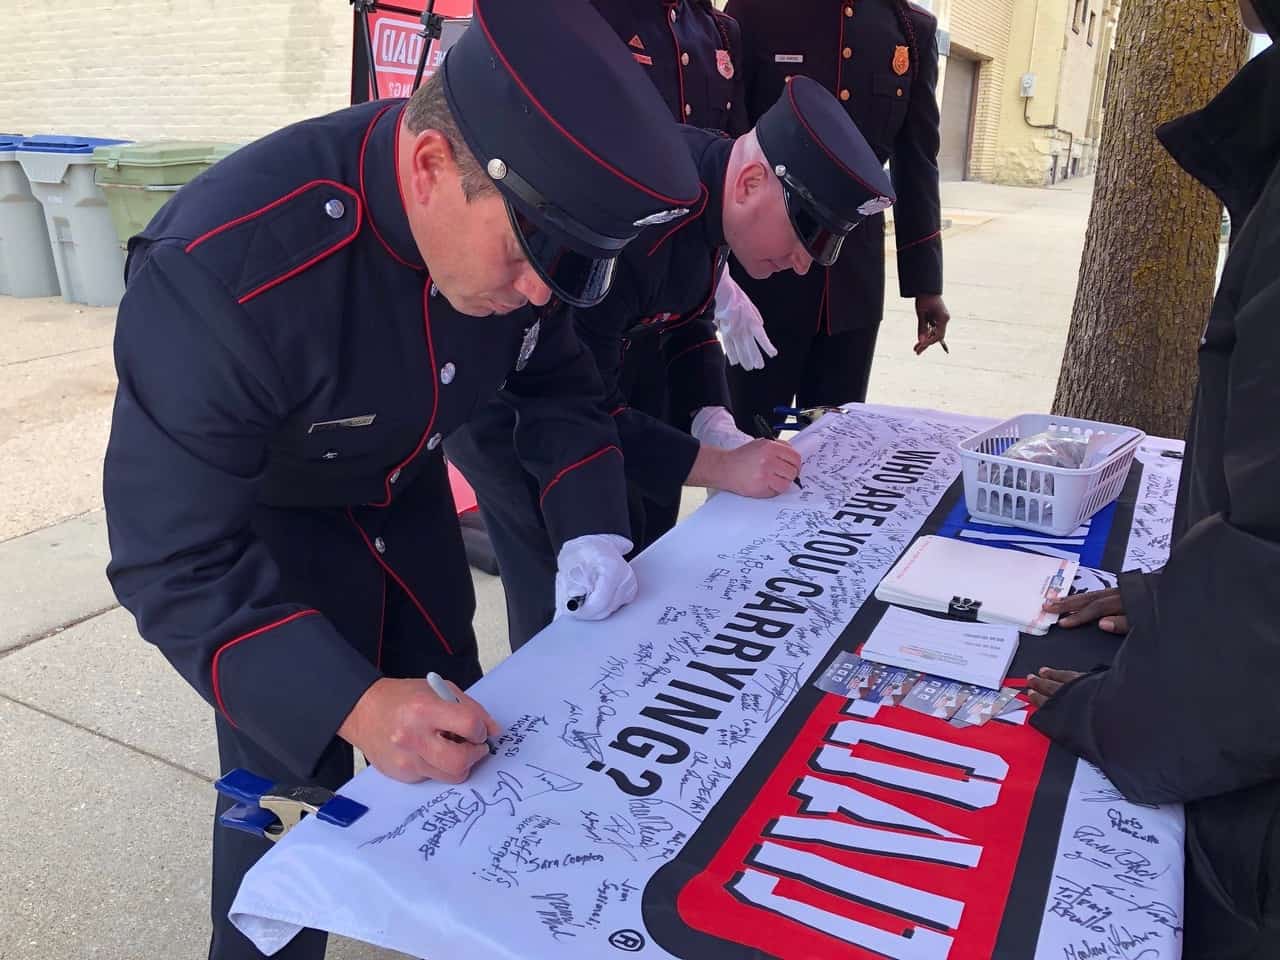 A service member signs his name on a banner on a table at a Carry The Load event.